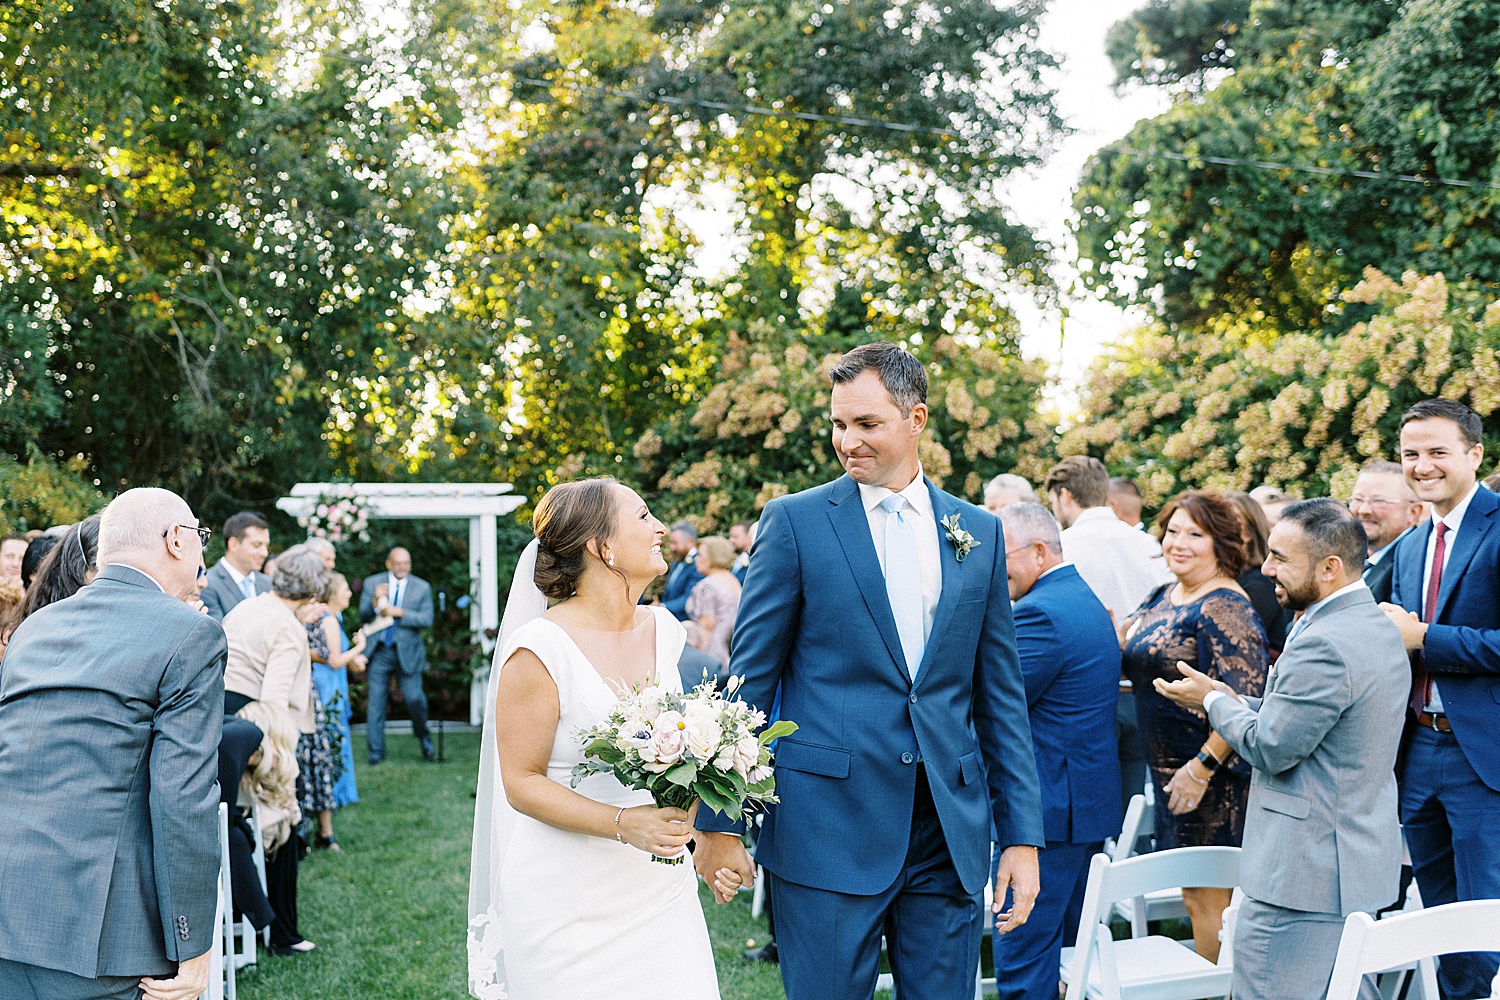 Newlyweds grinning down the aisle by New York wedding photographer Lynne Reznick